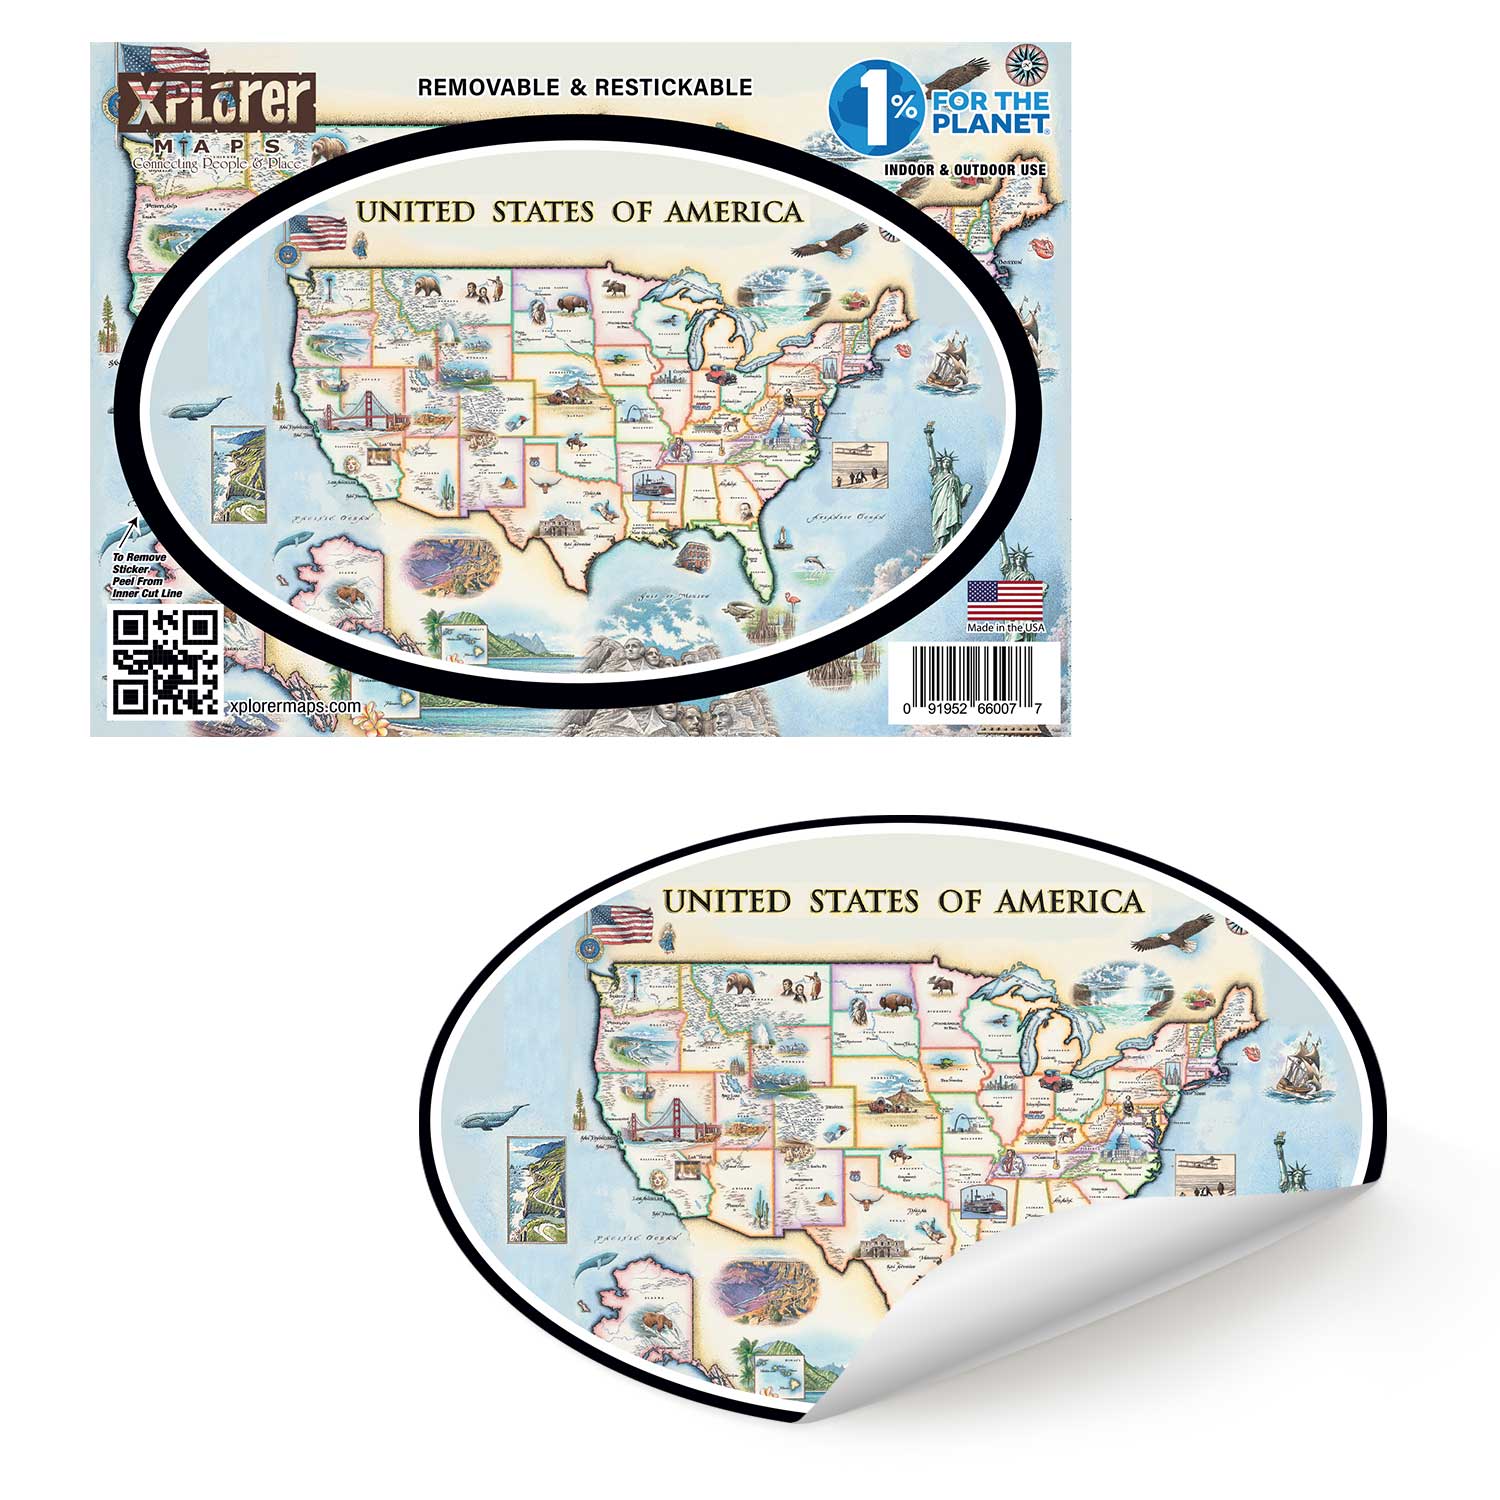 USA Map Sticker by Xplorer Maps. The map features illustrations of significance from each state in the United States of America. Including a bald eagle, Elvis, bison, the Golden Gate Bridge, the Space Needle, Niagara Falls, and the Alamo. 